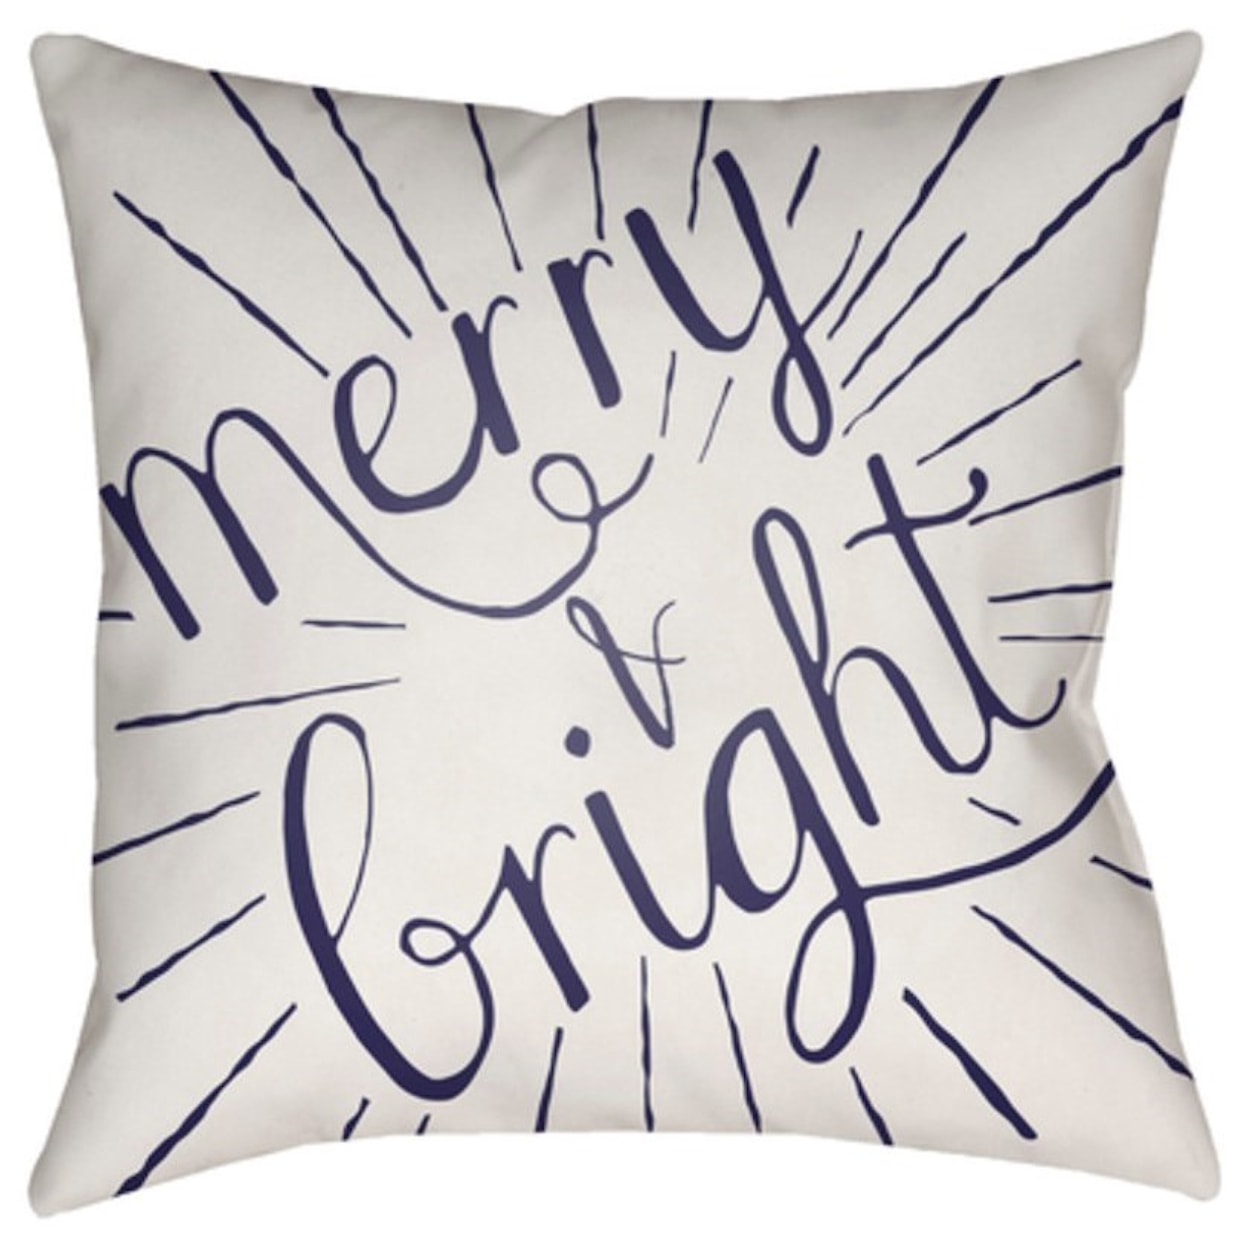 Surya Merry and Bright Pillow